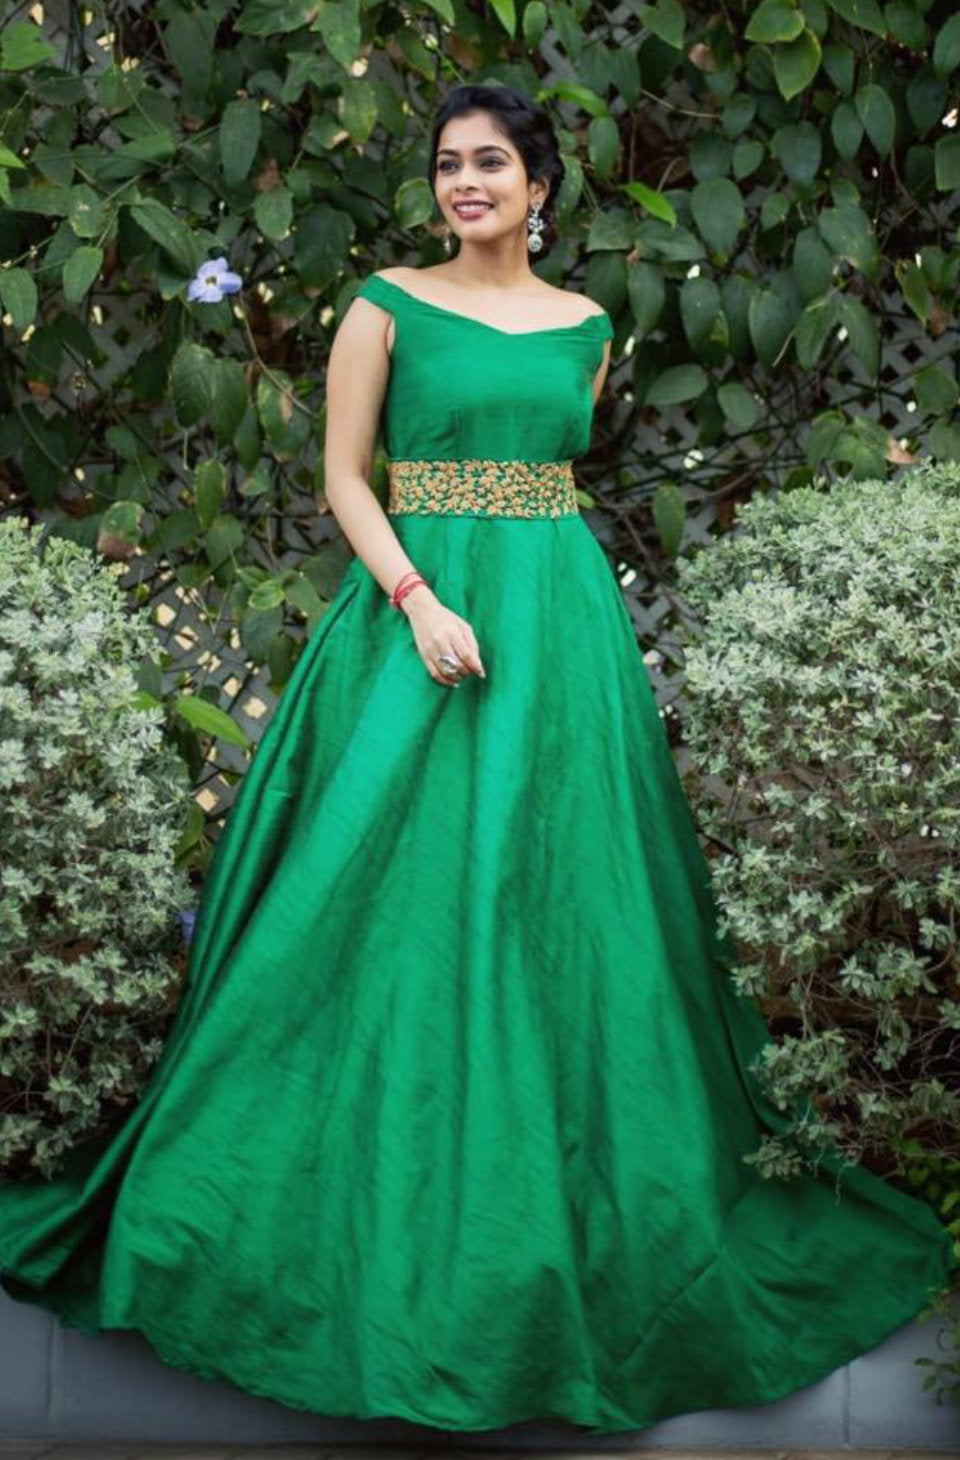 Emerald Green Prom Dresses New In Two Pieces Detachable Overskirt Formal  Evening Gowns Lace Sparkly Cocktail Homecoming Robe - AliExpress